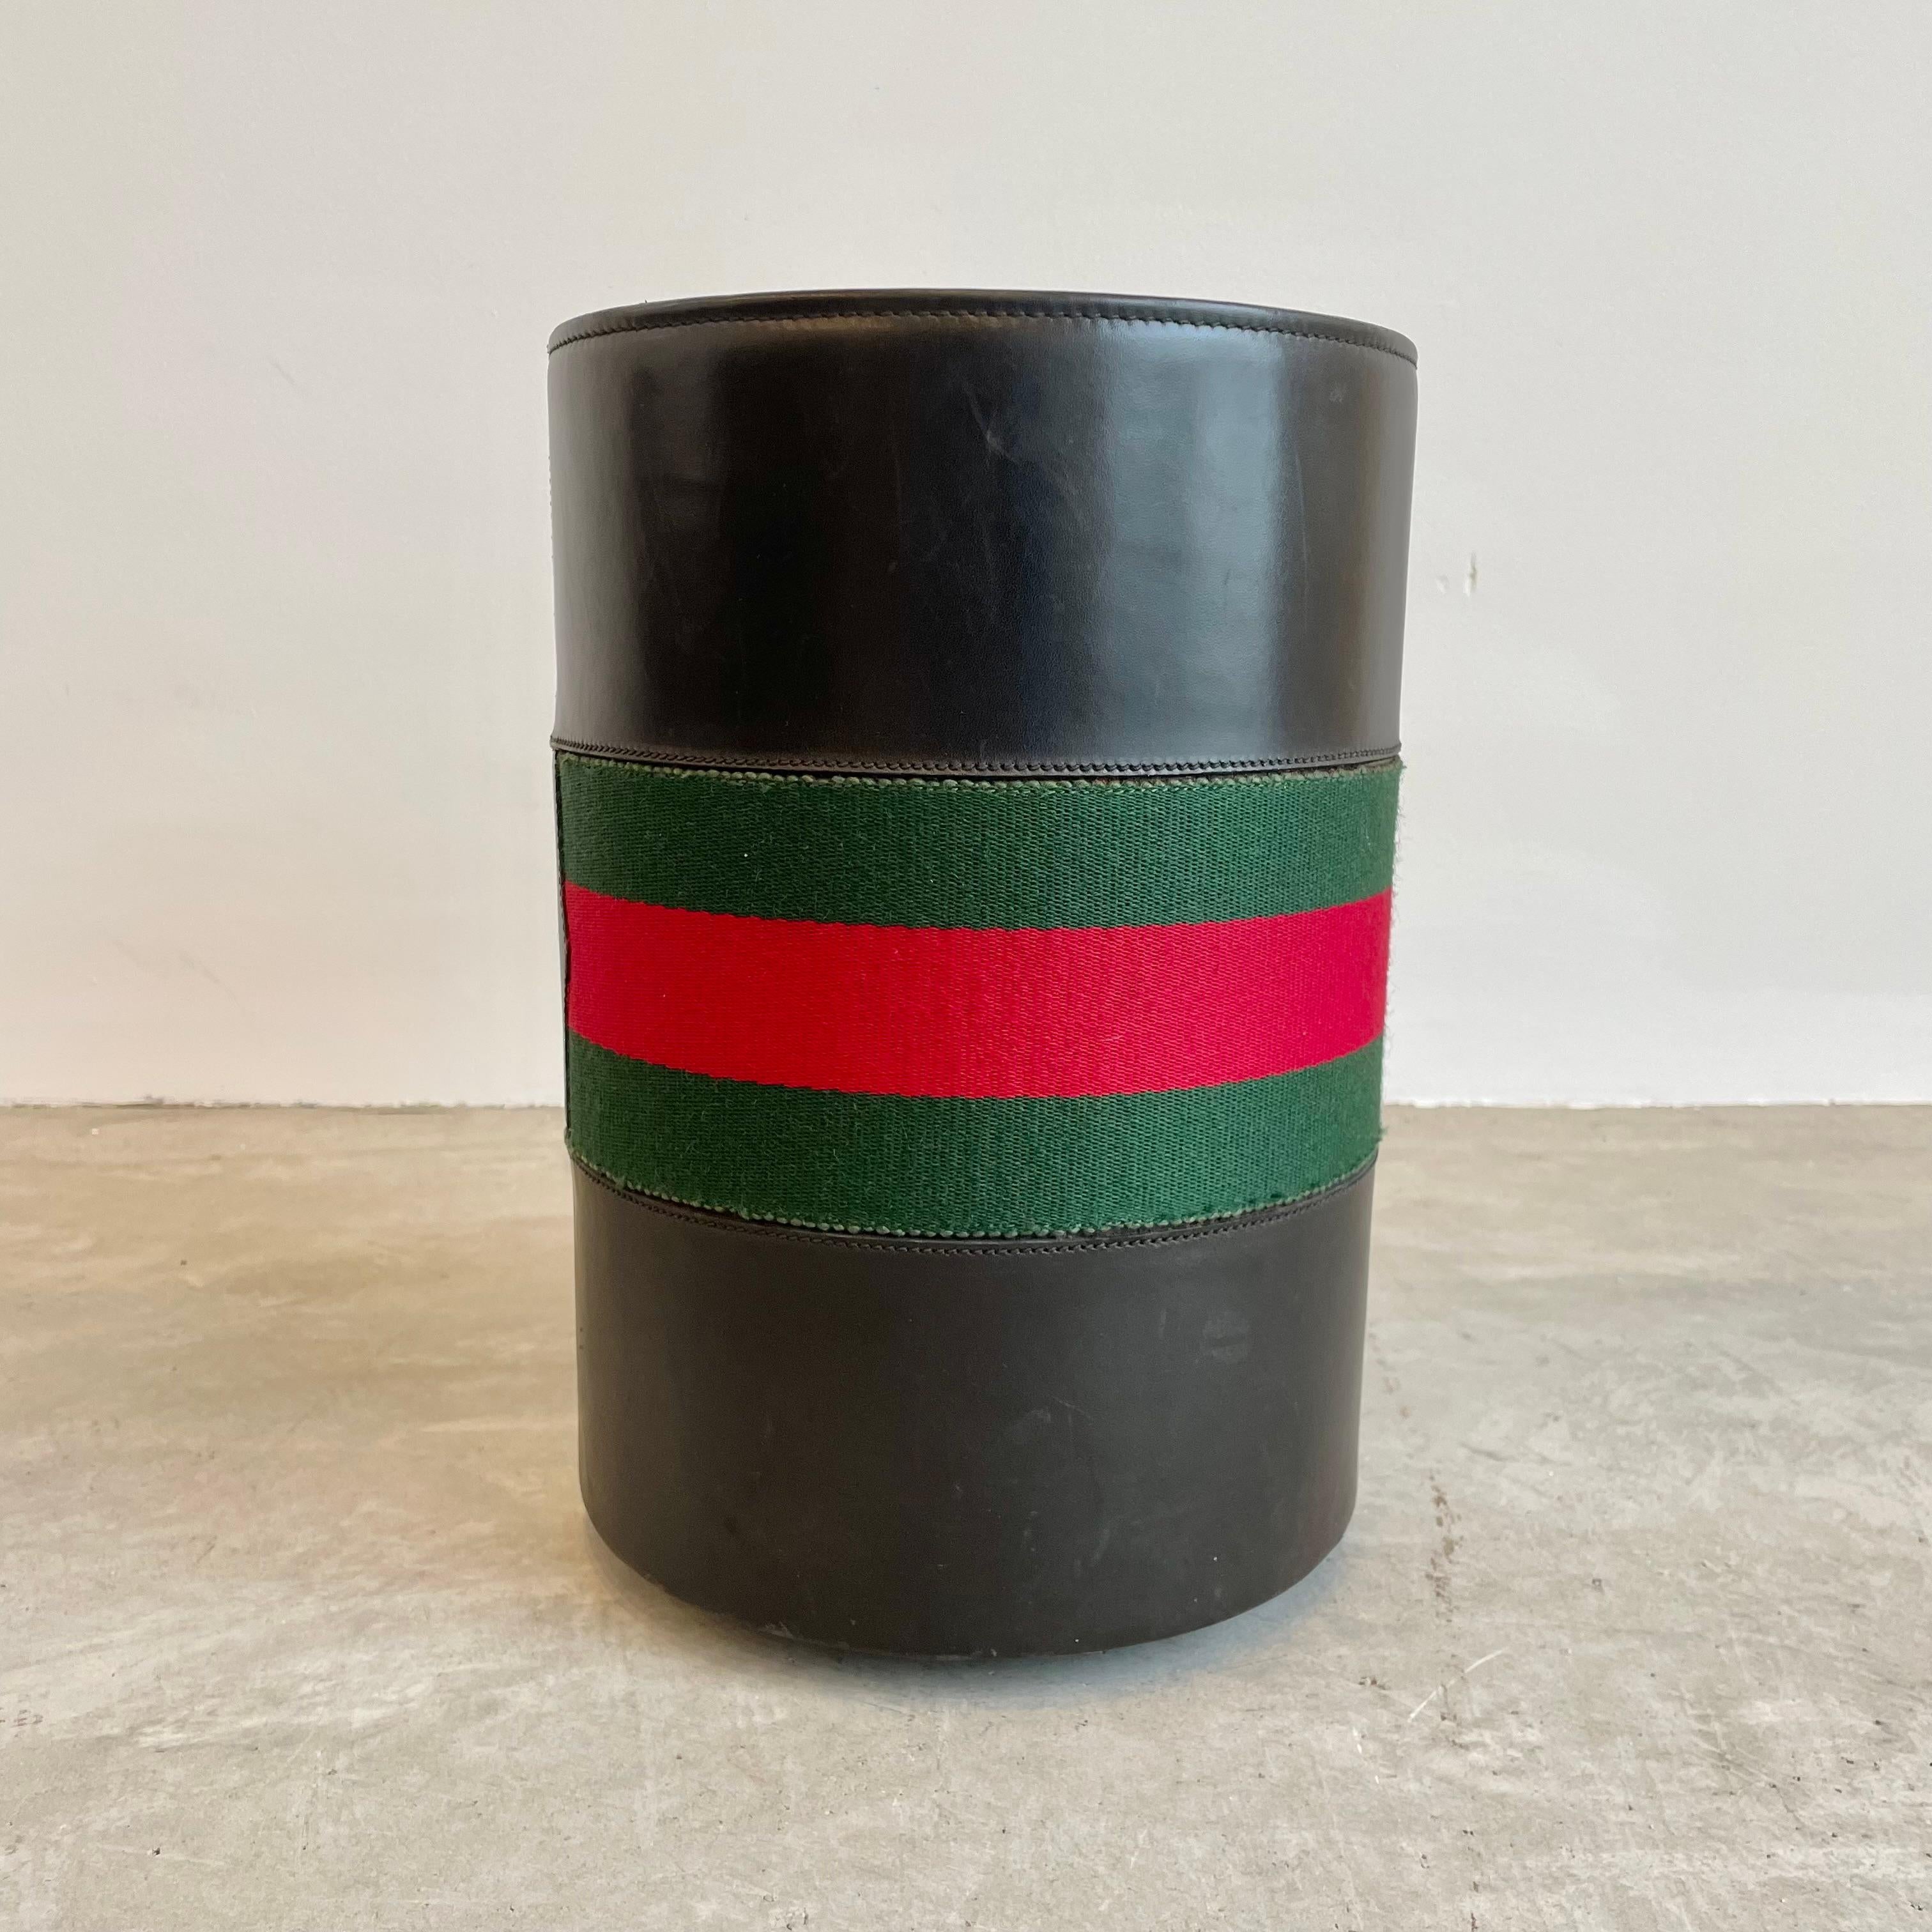 Vintage Gucci black leather waste paper basket, circa 1970s. Signature red and green fabric stripes along the middle. Stands atop four gold cone-shaped feet. Marked ‘Made in Italy by Gucci’ on the base. Gorgeous addition to any office.